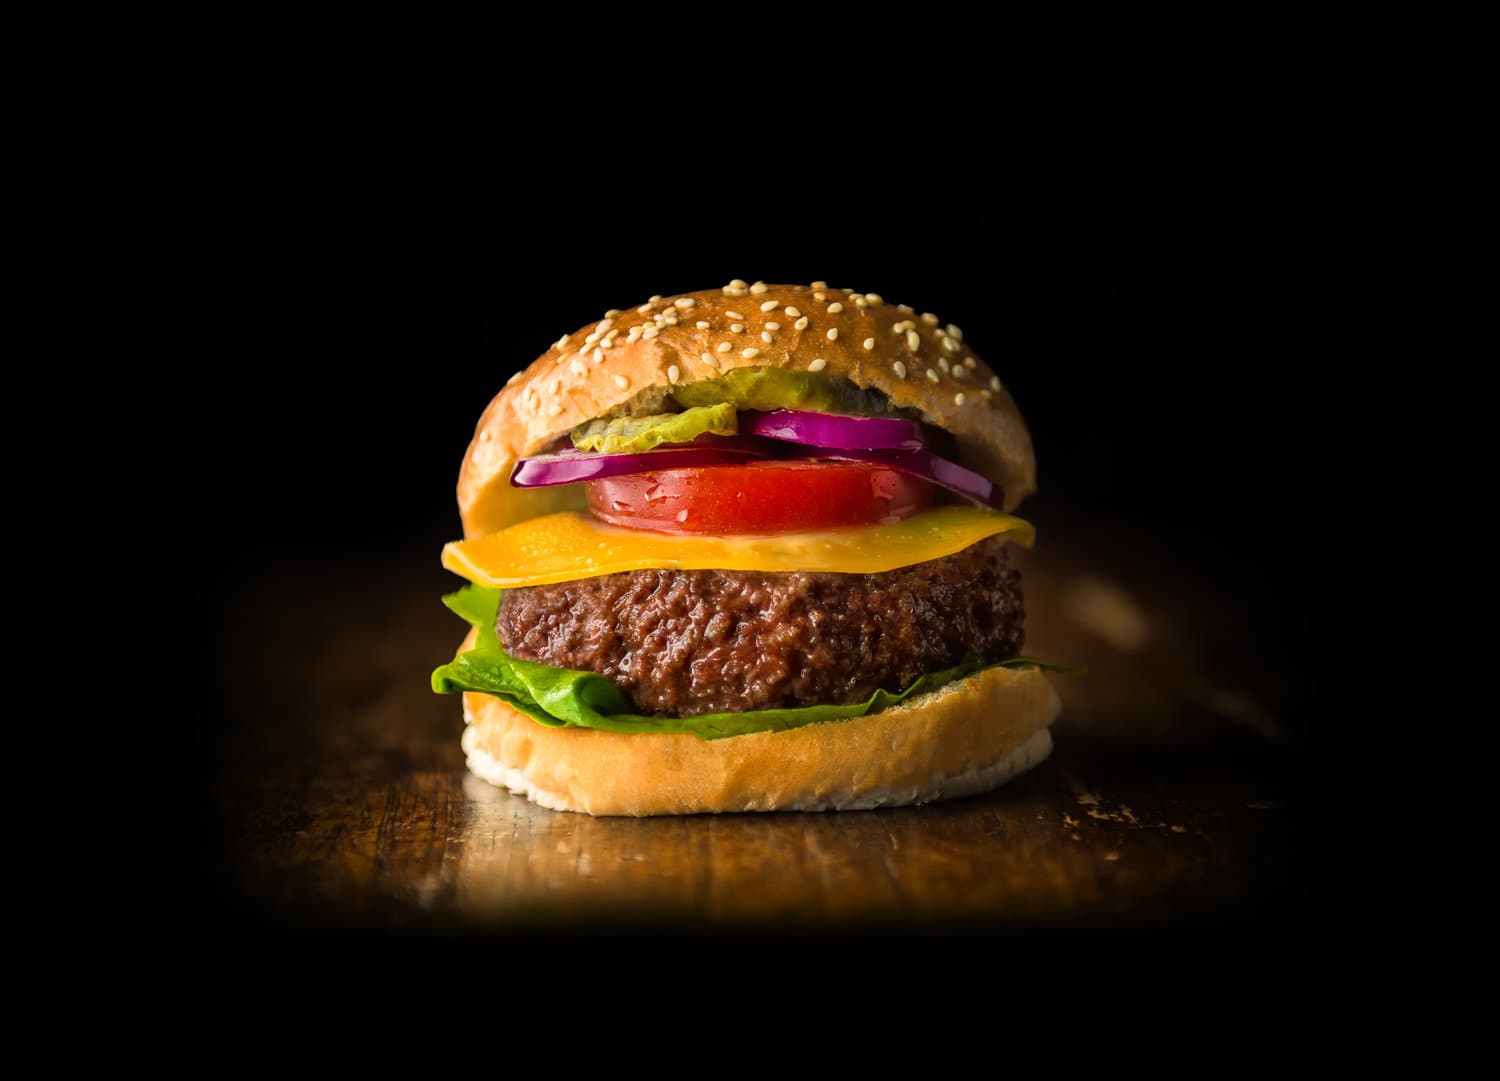 Mosa Meat boasts the creation of the world's first &quot;slaughter-free hamburger&quot; made from cow cells. (Courtesy Mosa Meat)